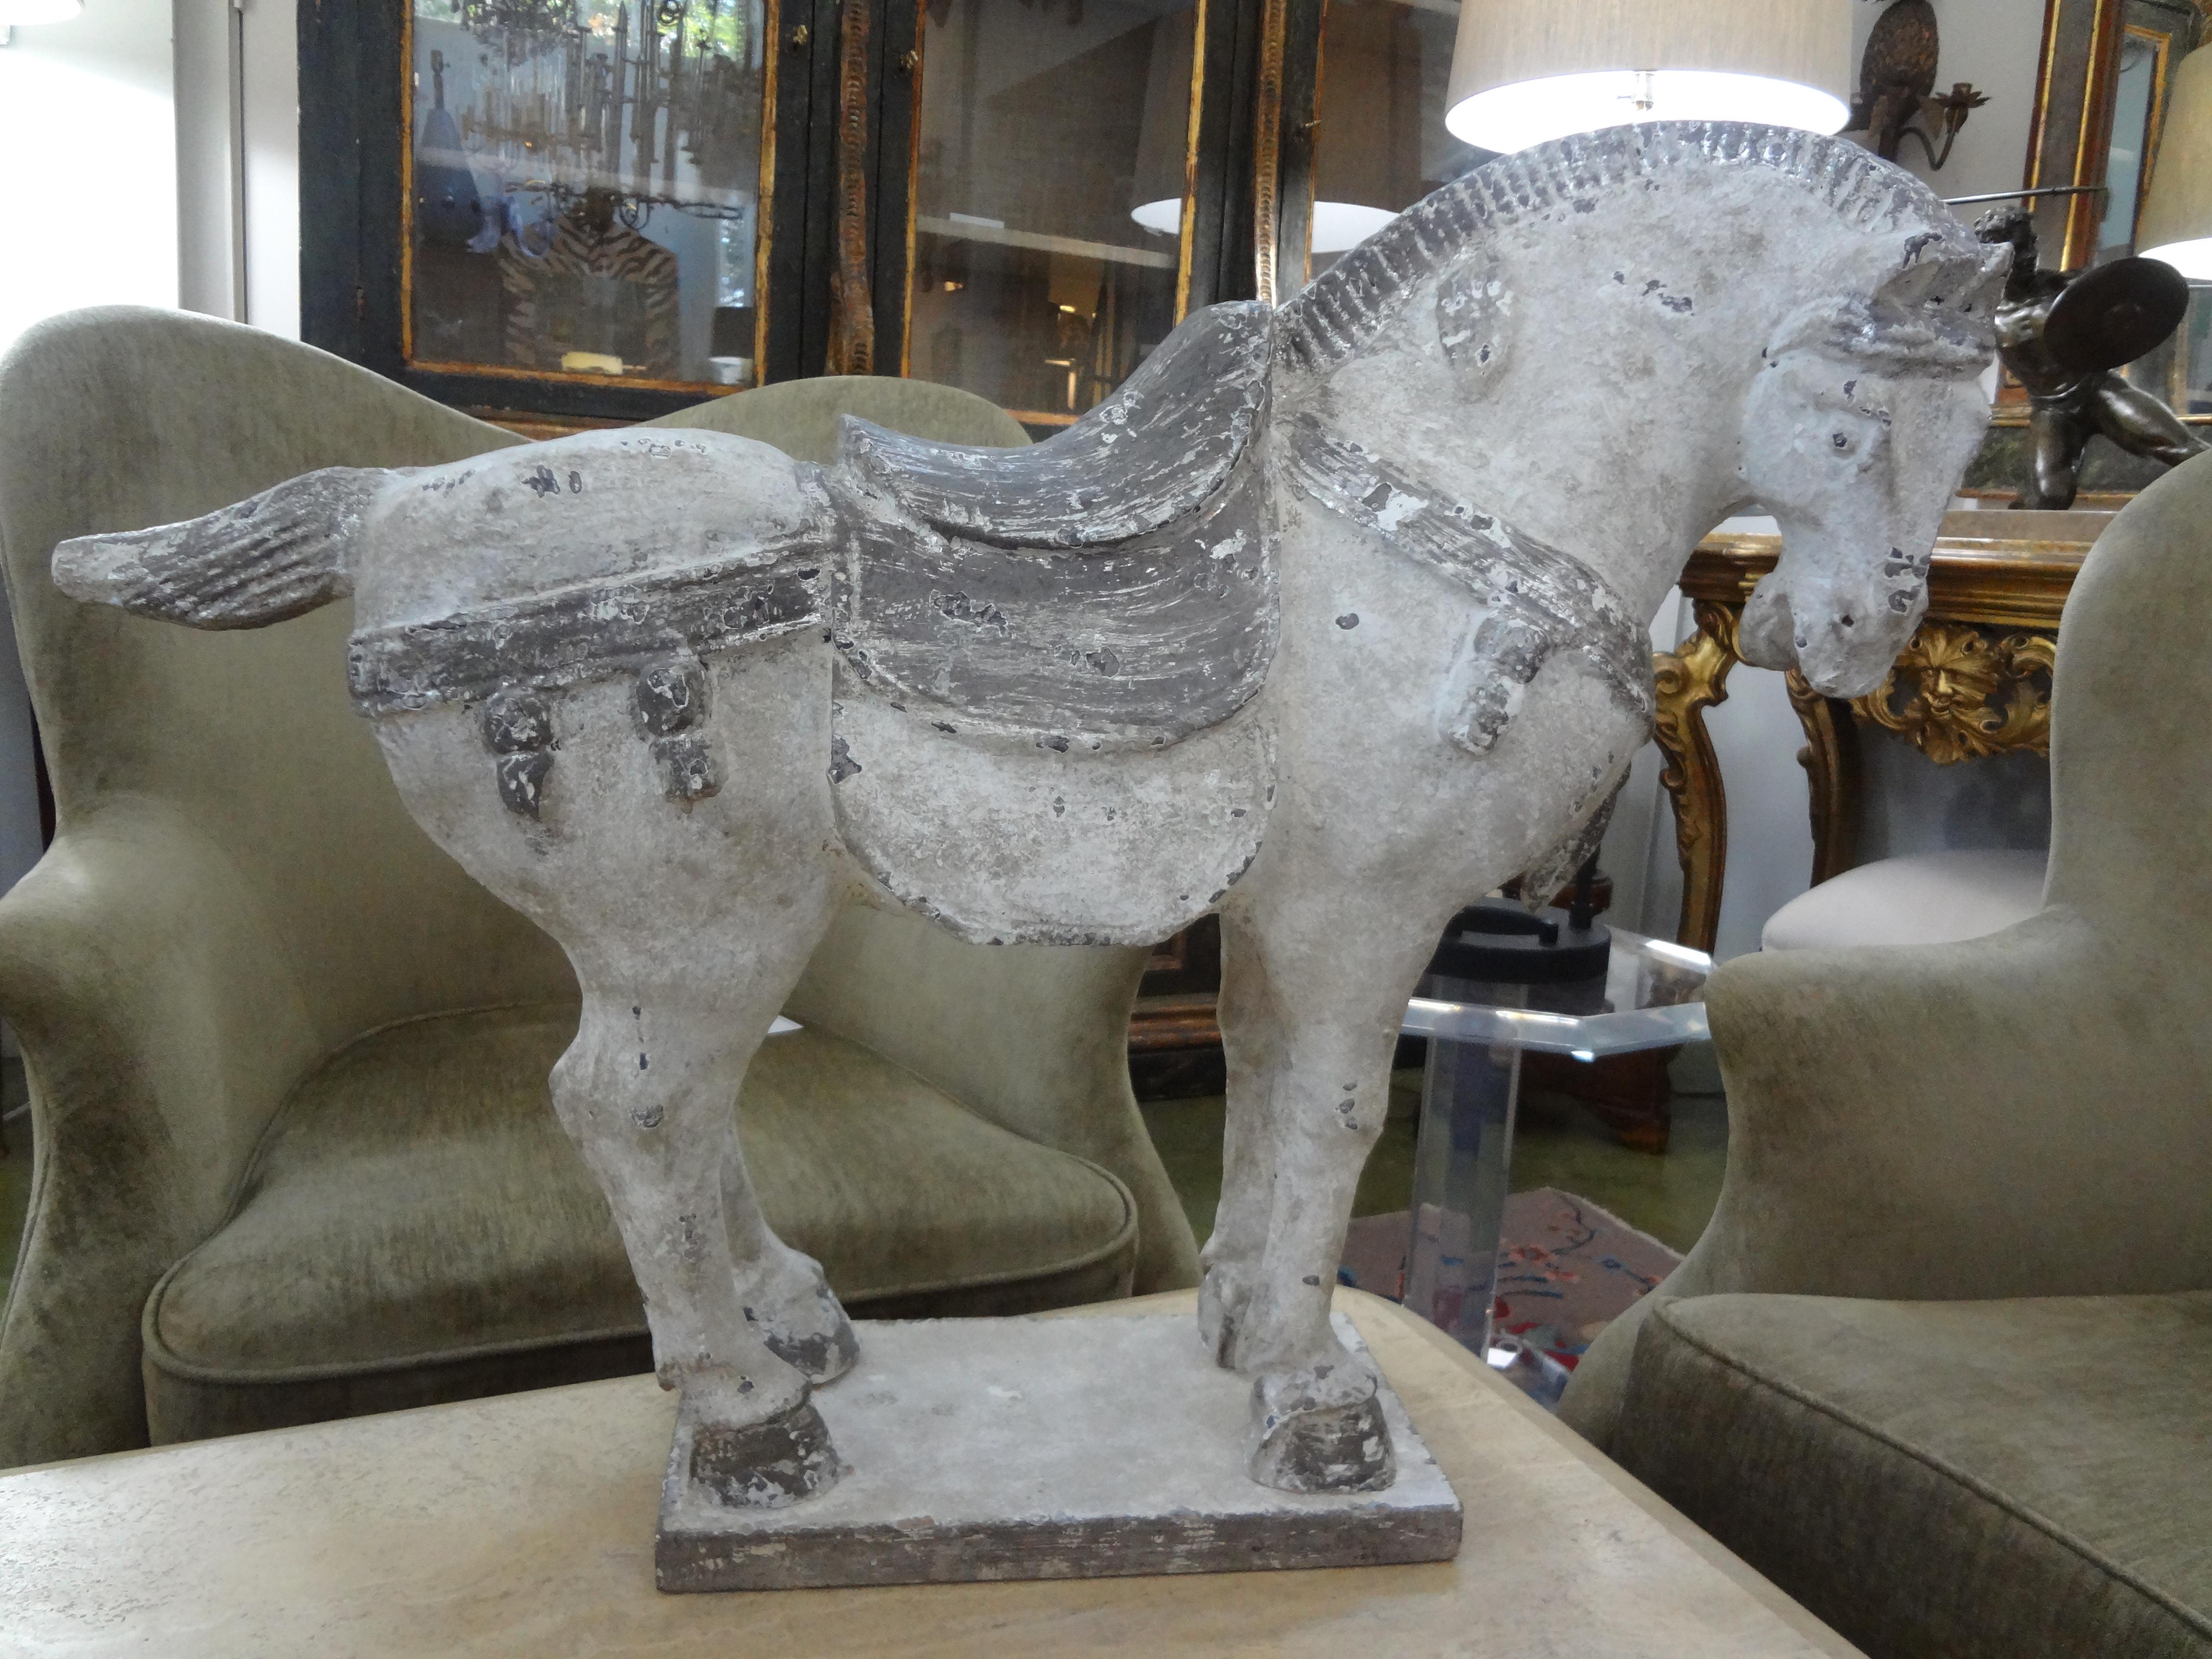 Large stylized plaster Tang style horse.
Large vintage stylized polychrome plaster tang style horse figure. This well detailed Hollywood Regency tang dynasty style horse figure with a saddle and turned head modeled in a standing pose with an arched